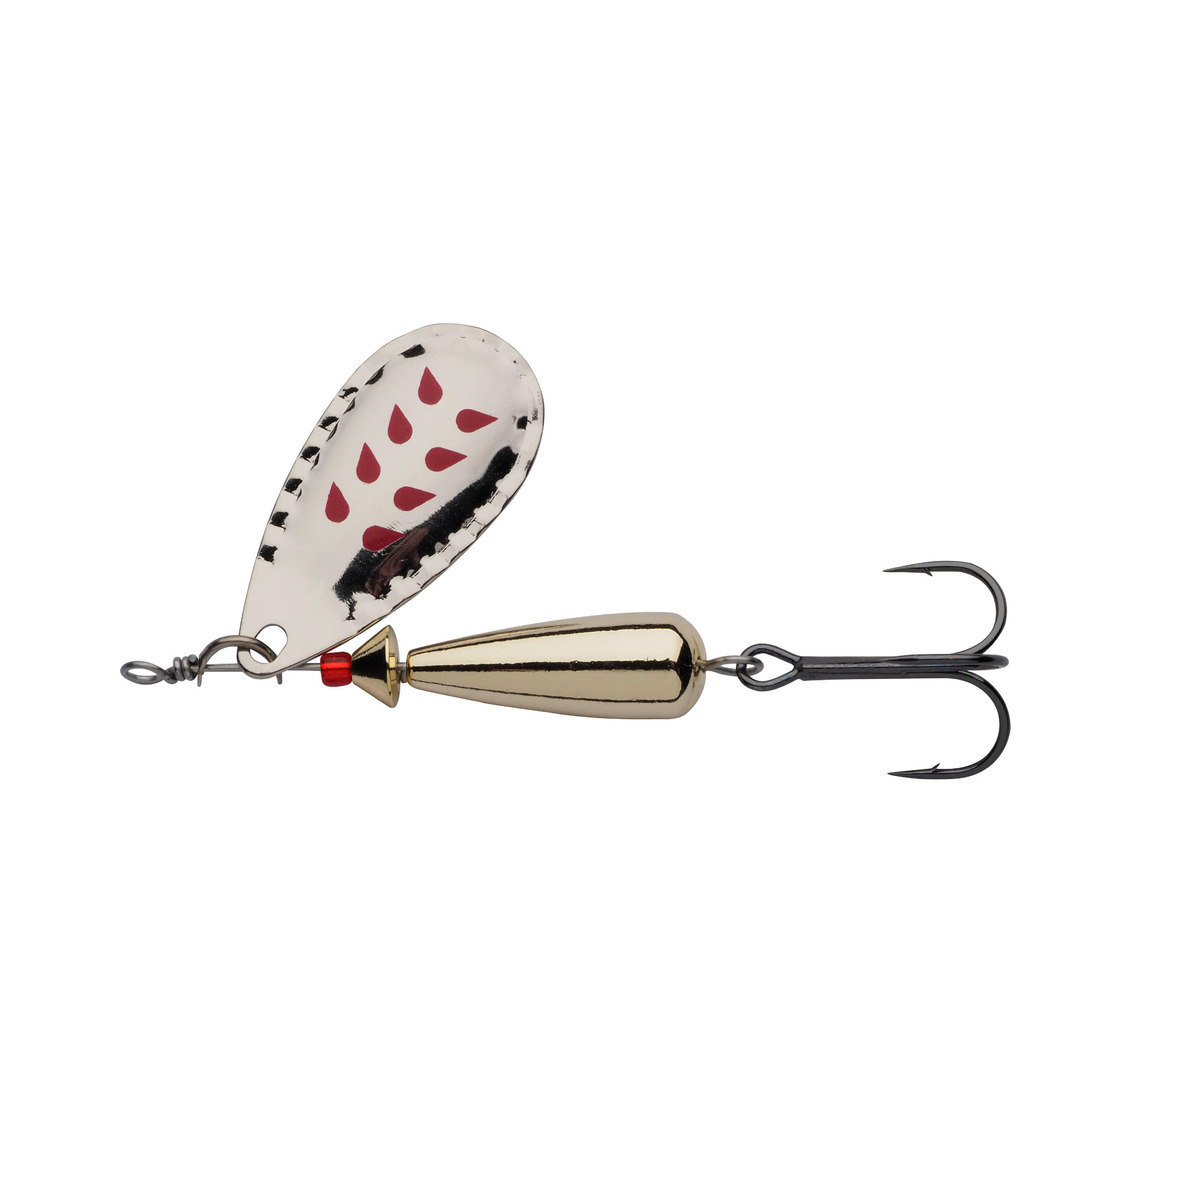 Abu Garcia Droppen Spinners 12 G - Silver-Red Marks - 53 mm